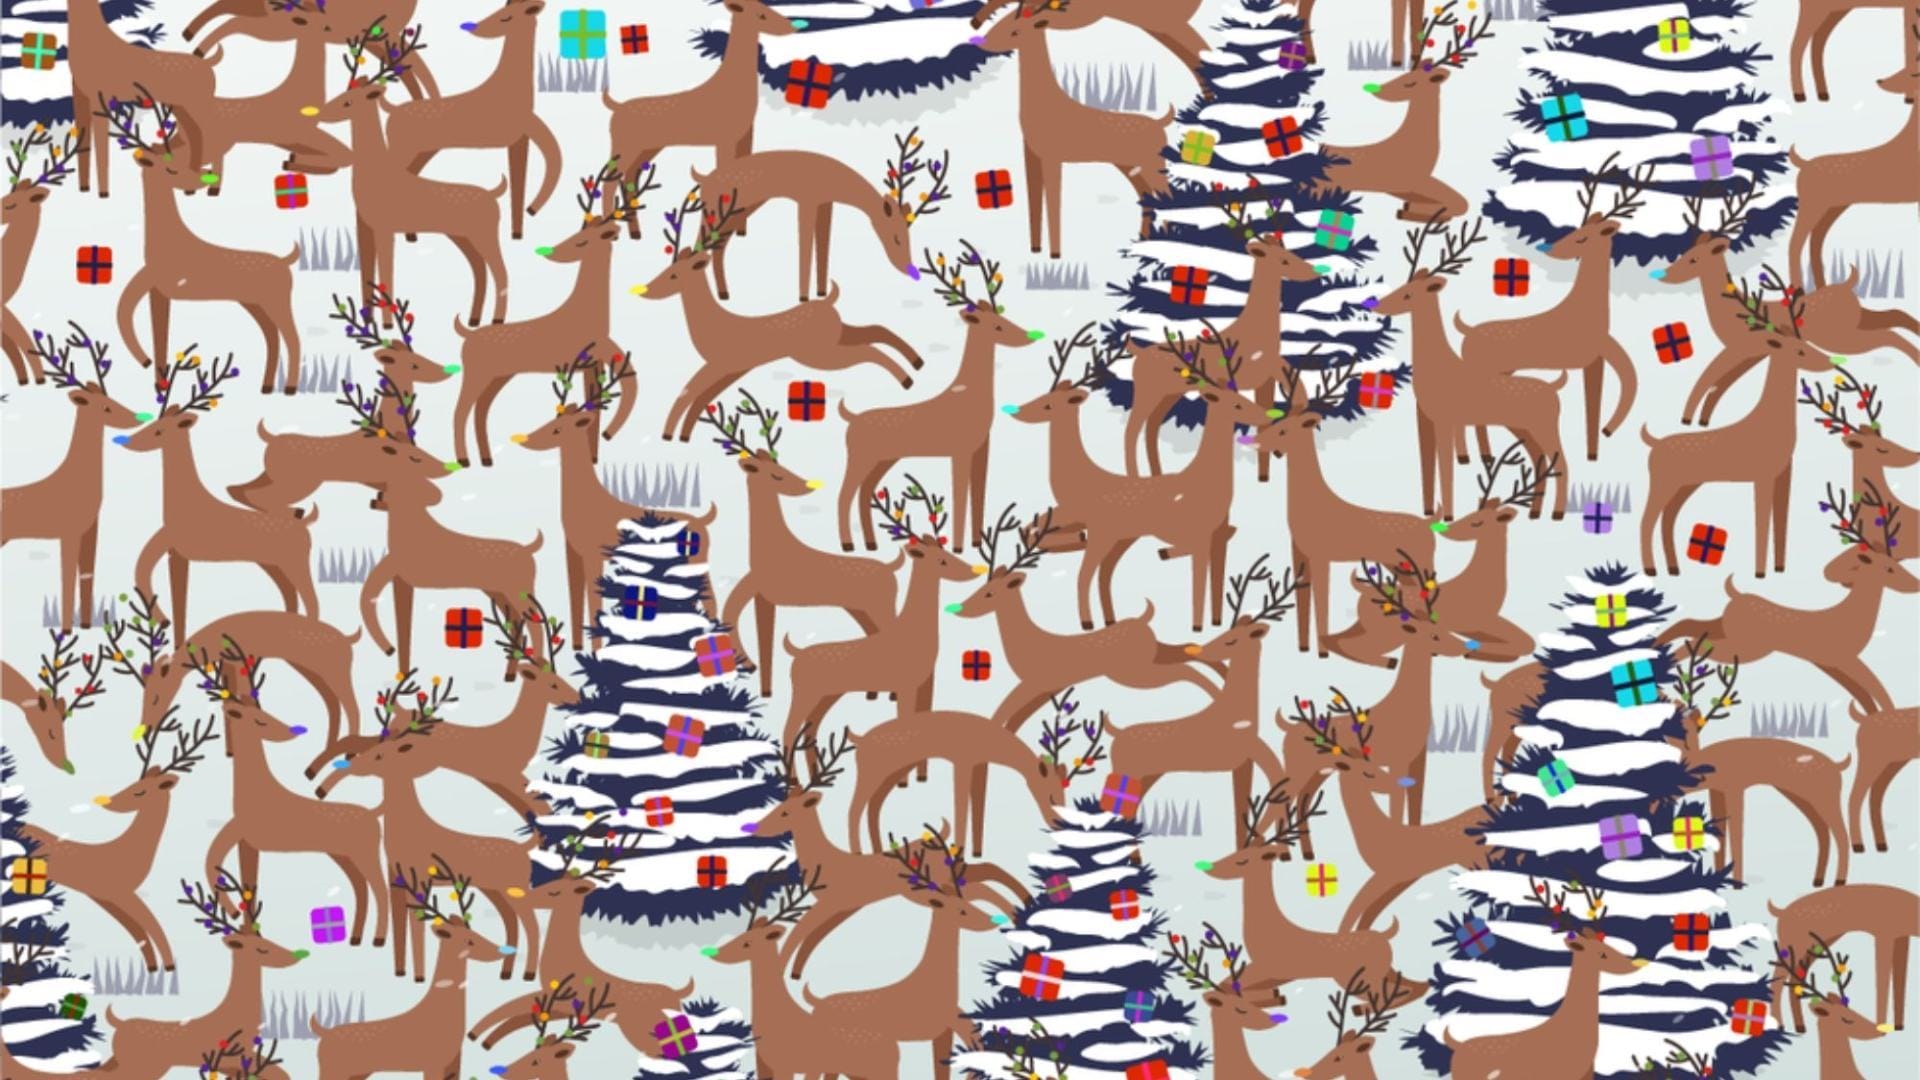 You've got the eyes of a hawk if you can spot Rodolfo and his red nose in this festive puzzle.